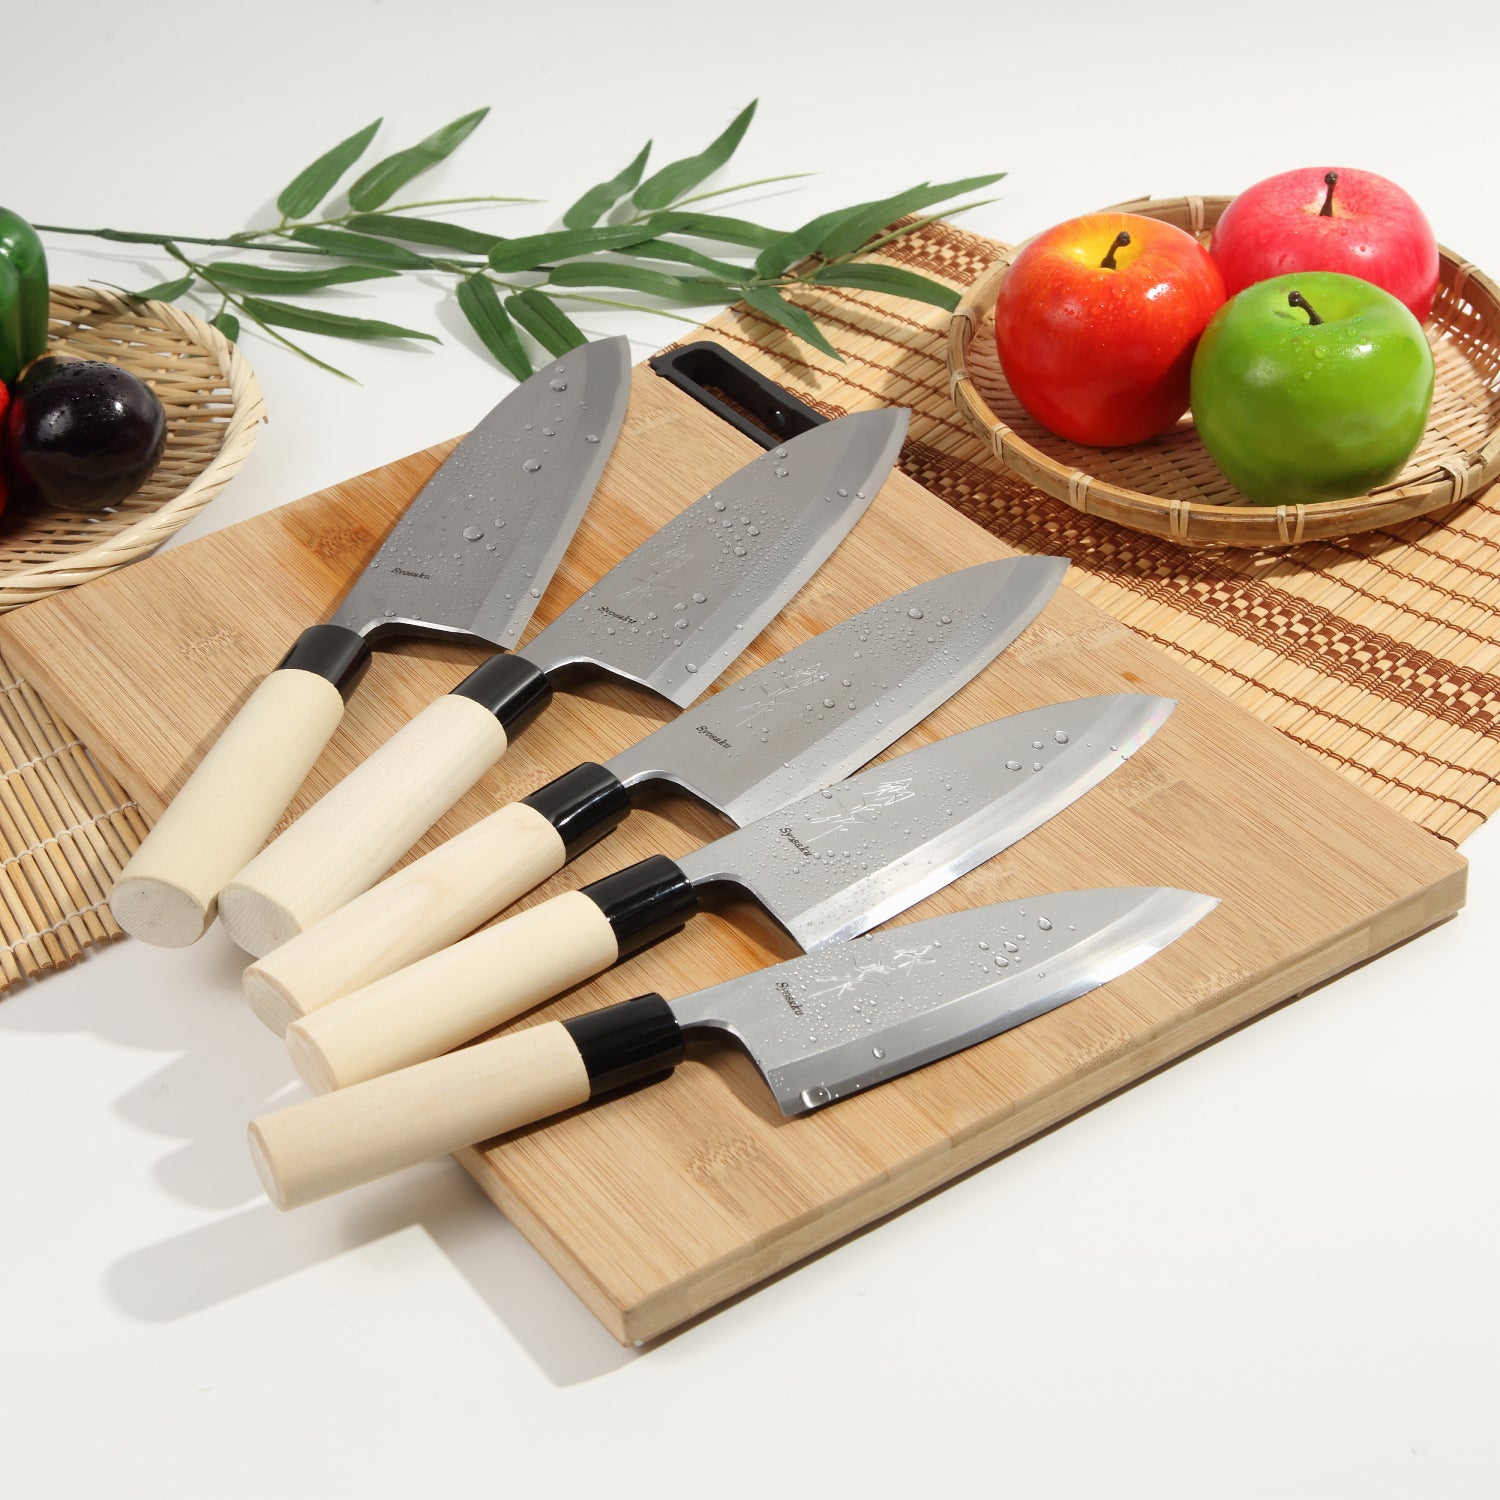 Knife Block Set,6-Pieces Yellow Sharp Stainless Steel Cooking